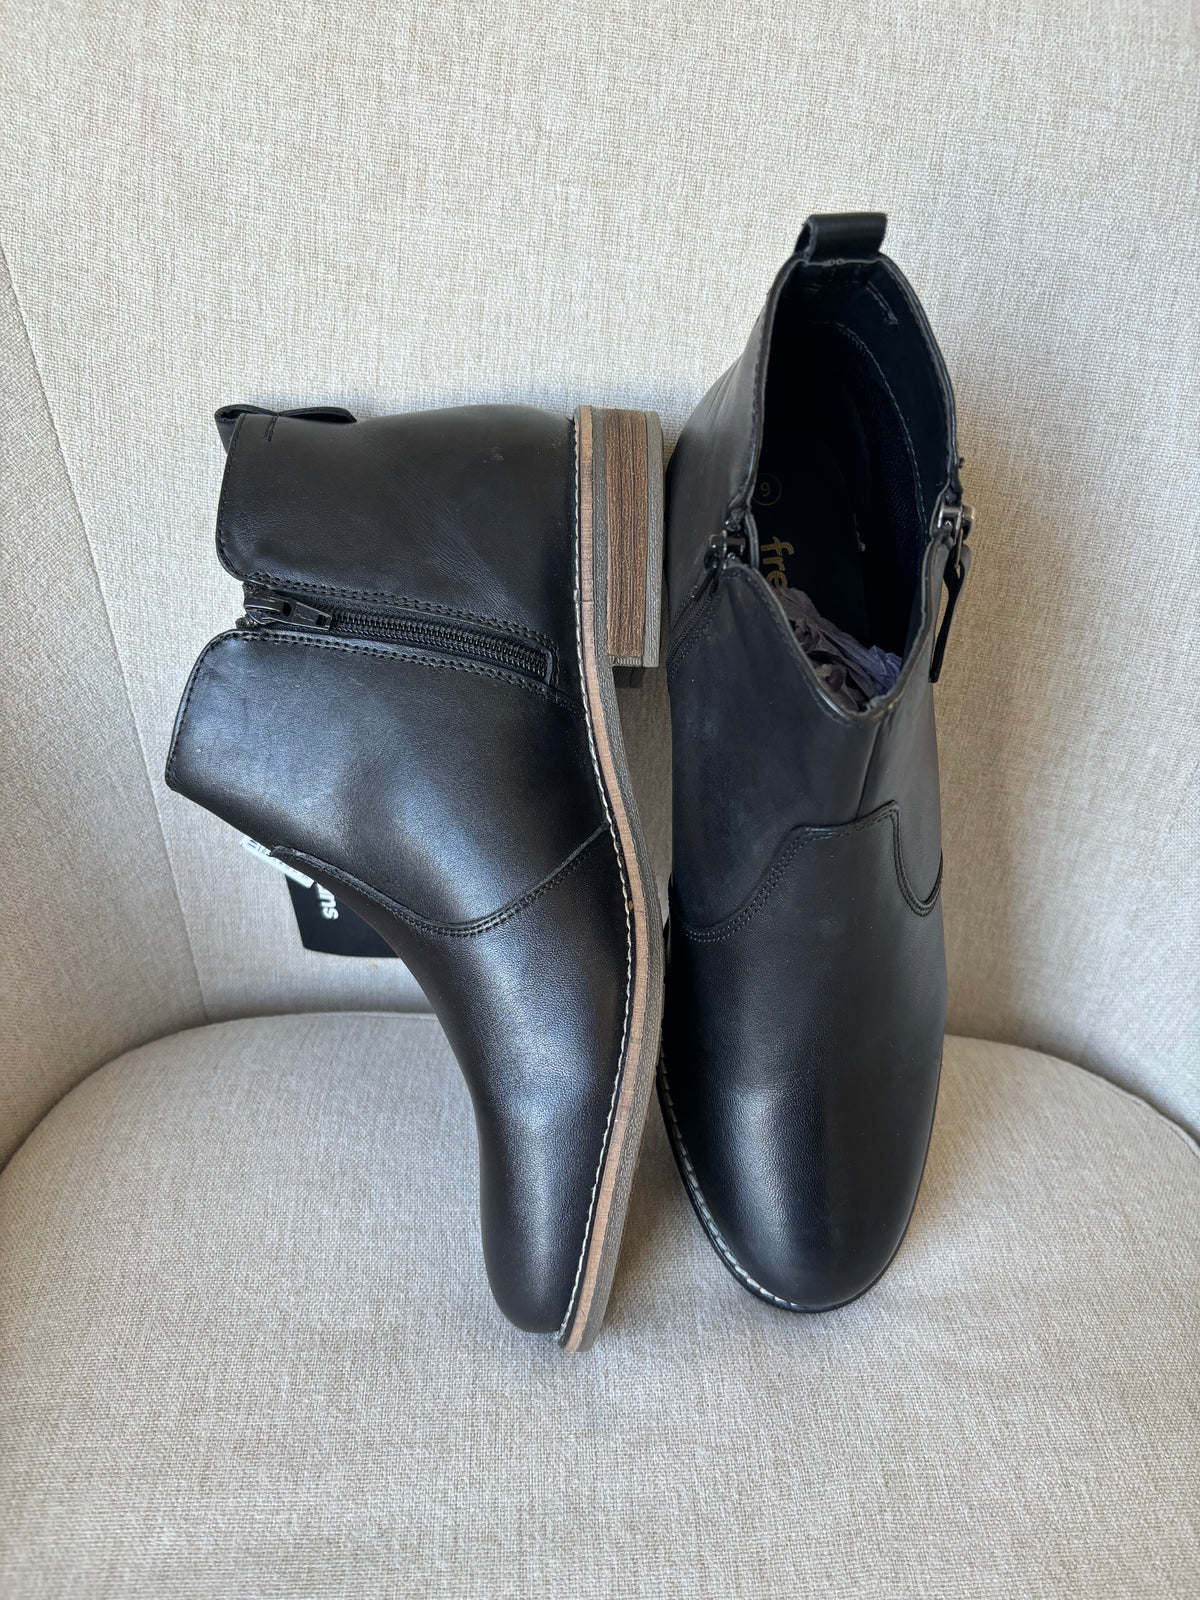 Black Leather Wide Fit Short Ankle Boots By Kaleidoscope Size 8